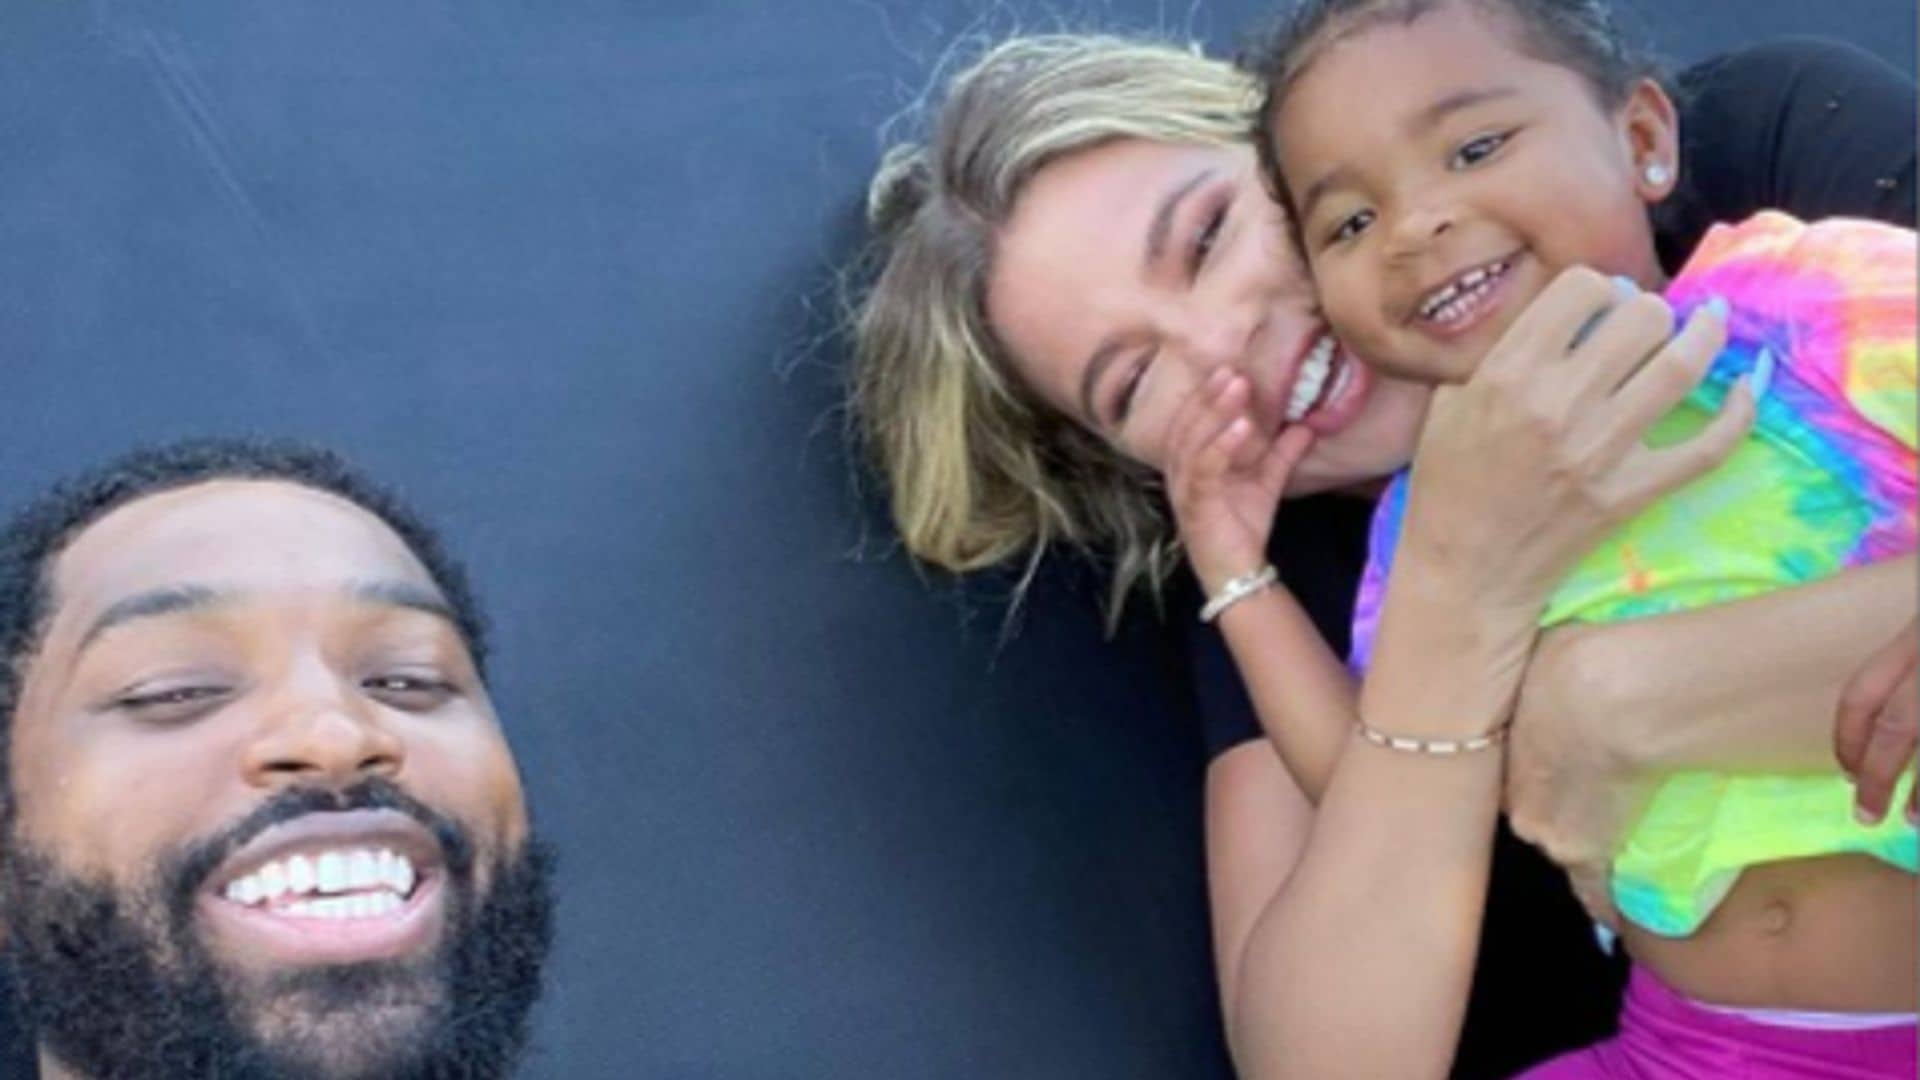 This is how Tristan Thompson congratulated Khloé Kardashian on her People’s Choice Award win